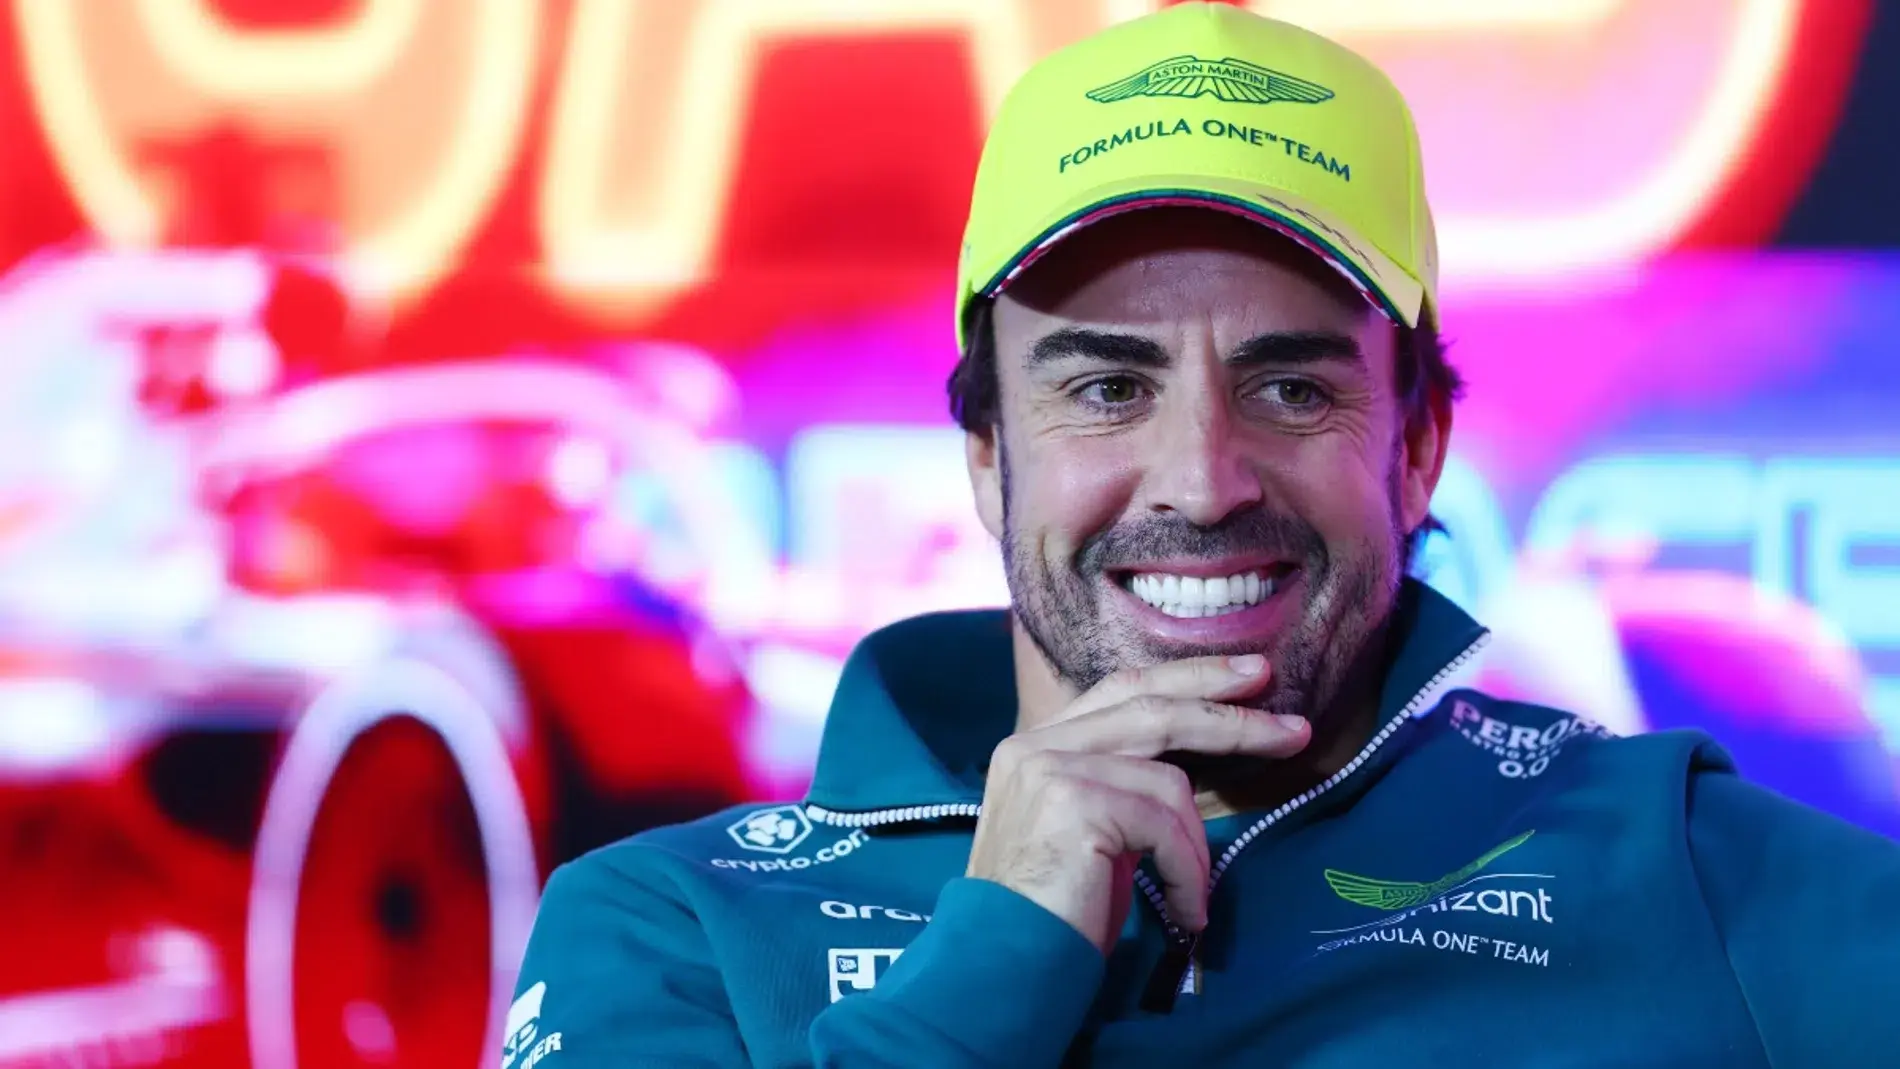 Fernando Alonso has a plan to catch up with Verstappen
	

